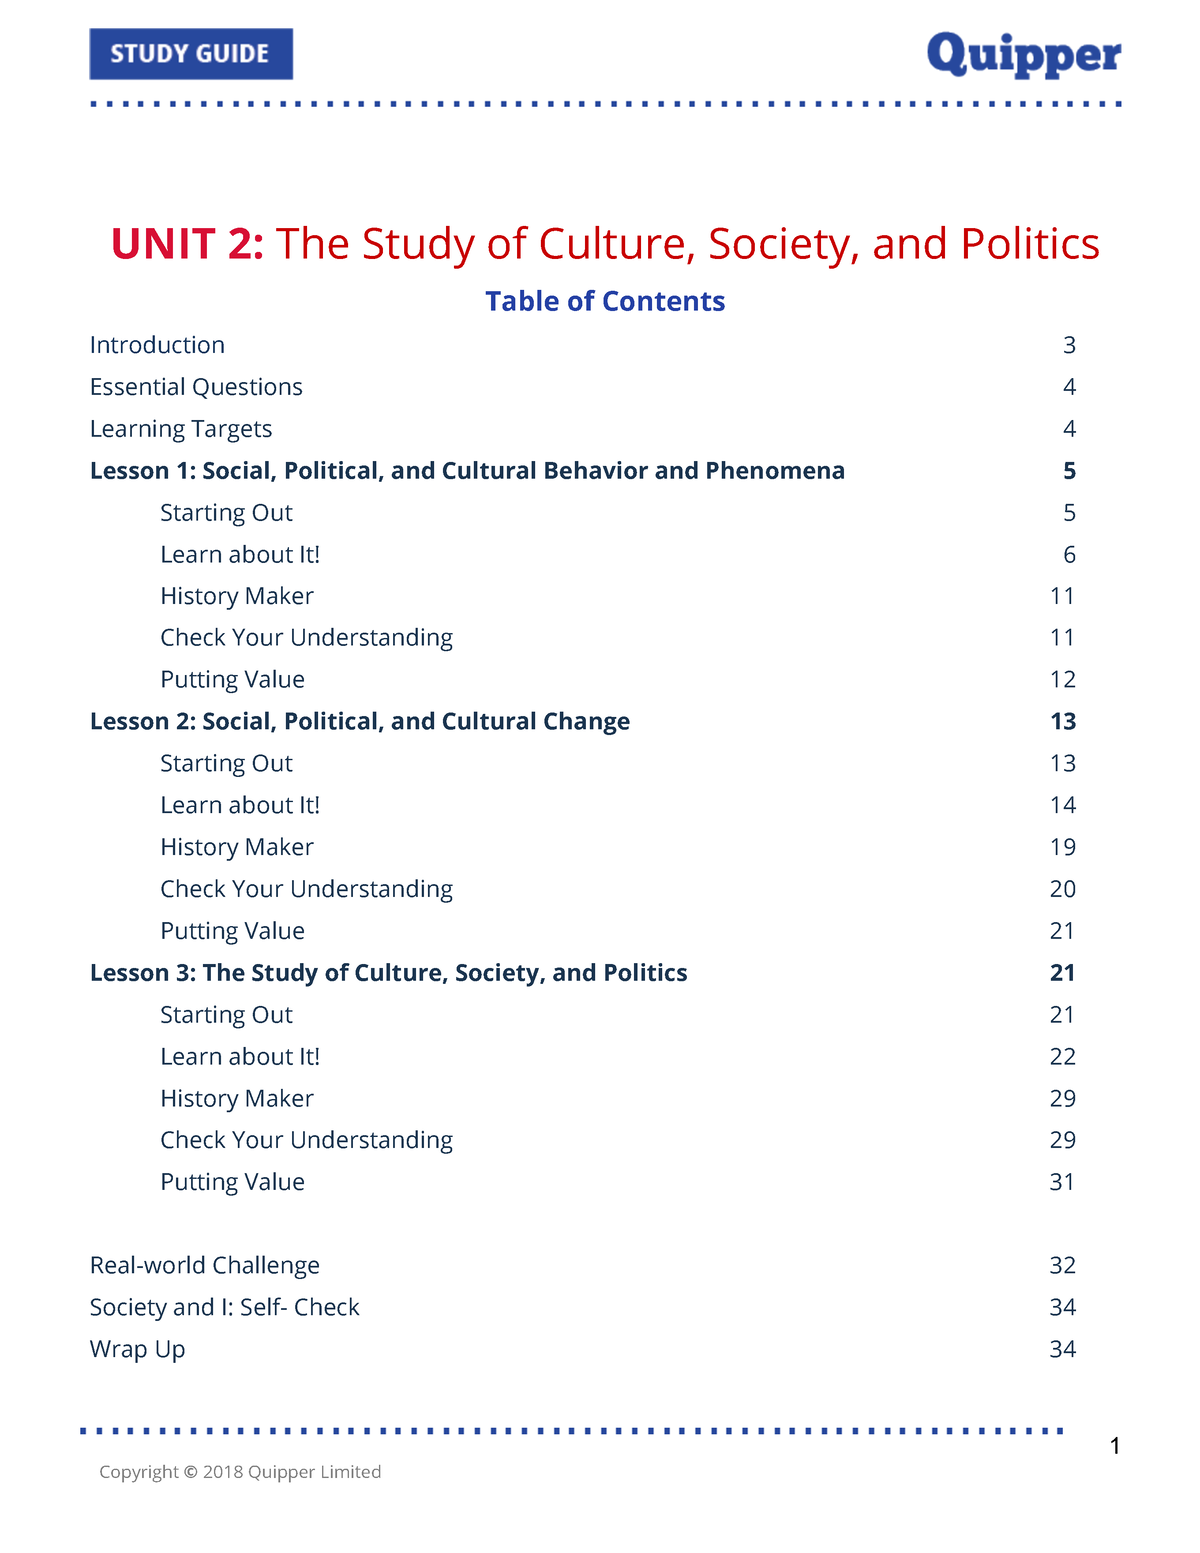 what is understanding culture society and politics essay